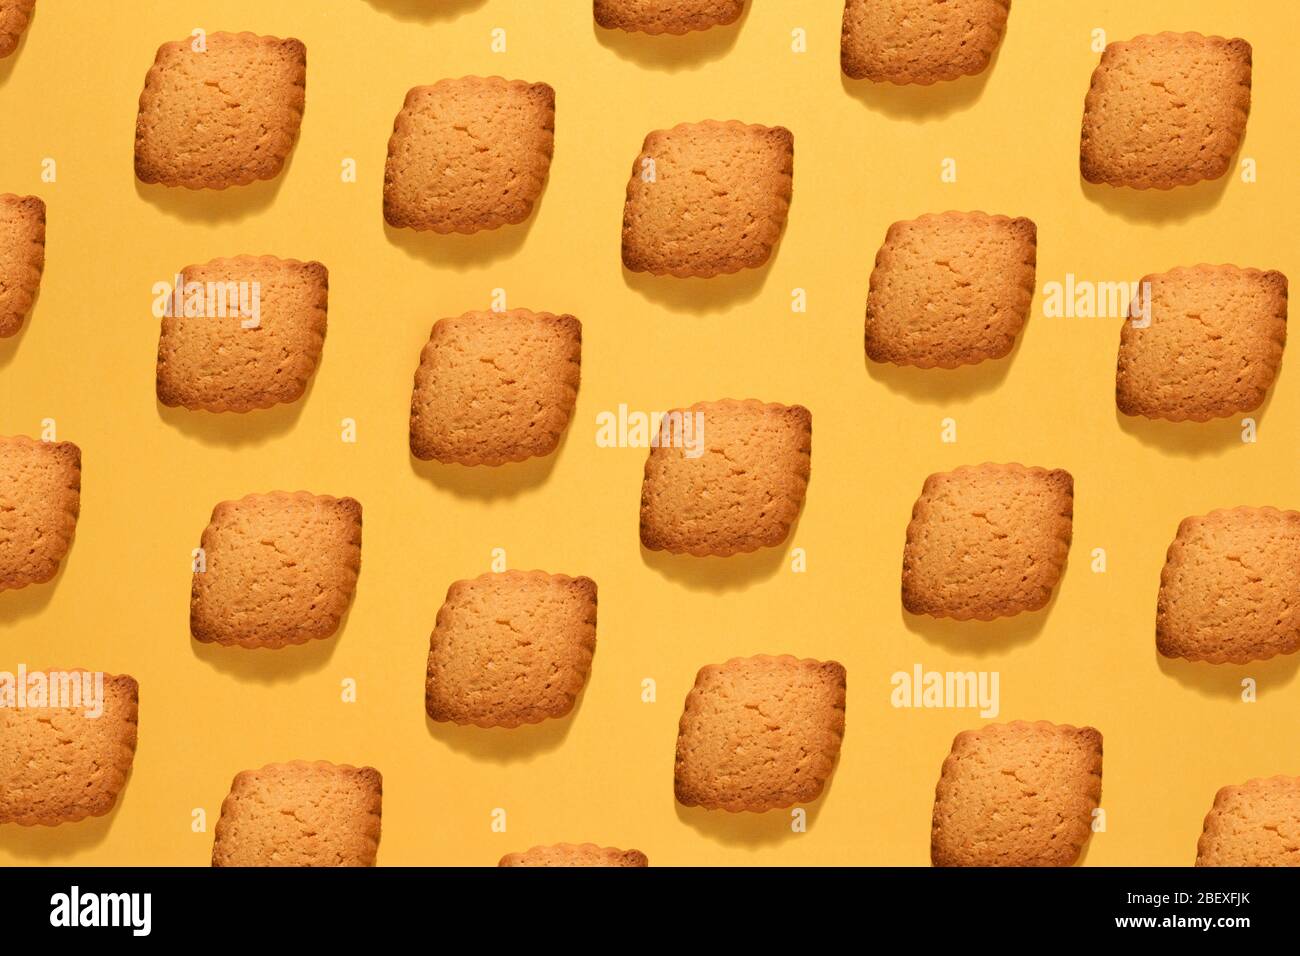 Baking or food still life background of neatly arranged crunchy cookies in diagonal lines on yellow in a full frame view Stock Photo